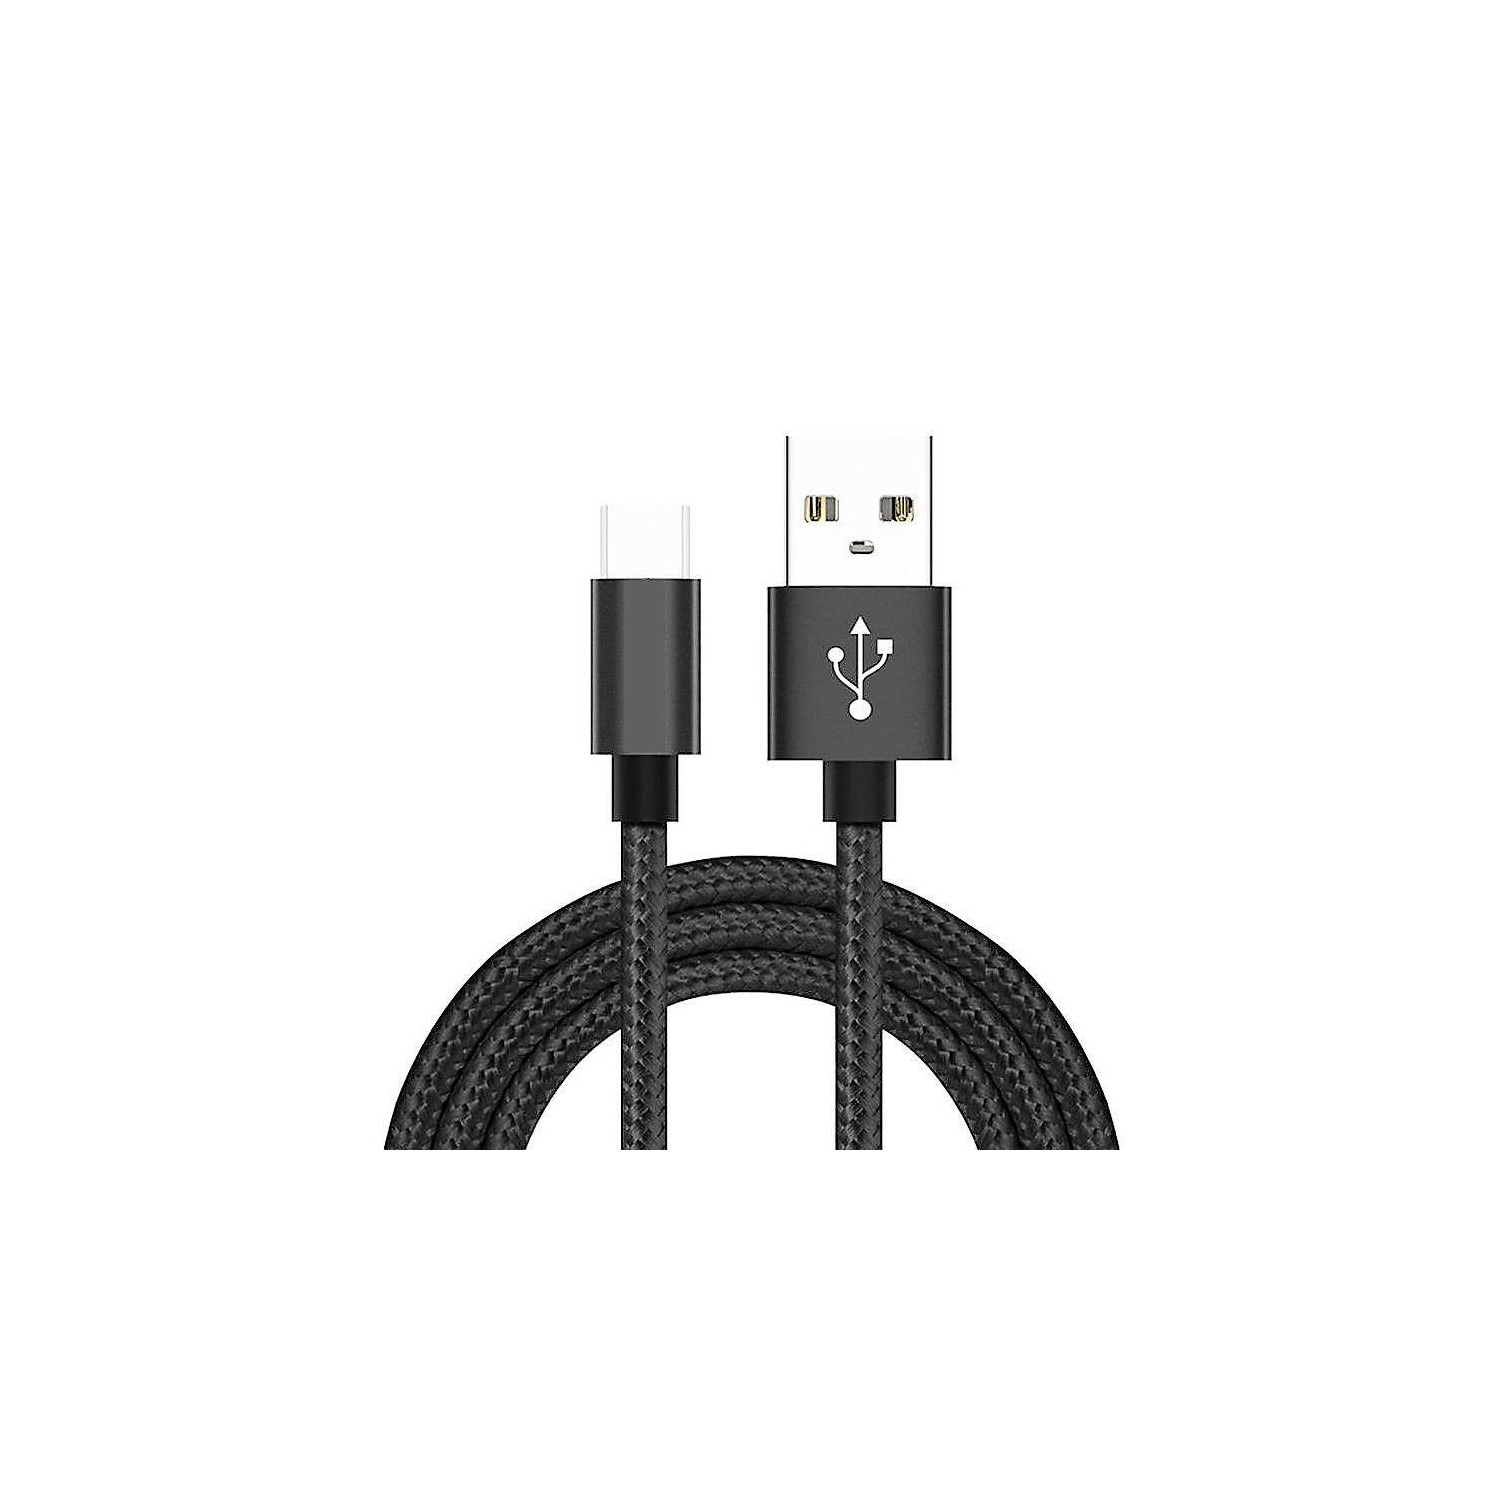 USB Type C Cable Fast Charging for Samsung S20 FE S10 S9 A5 A8 Pixel 3 4a Velvet